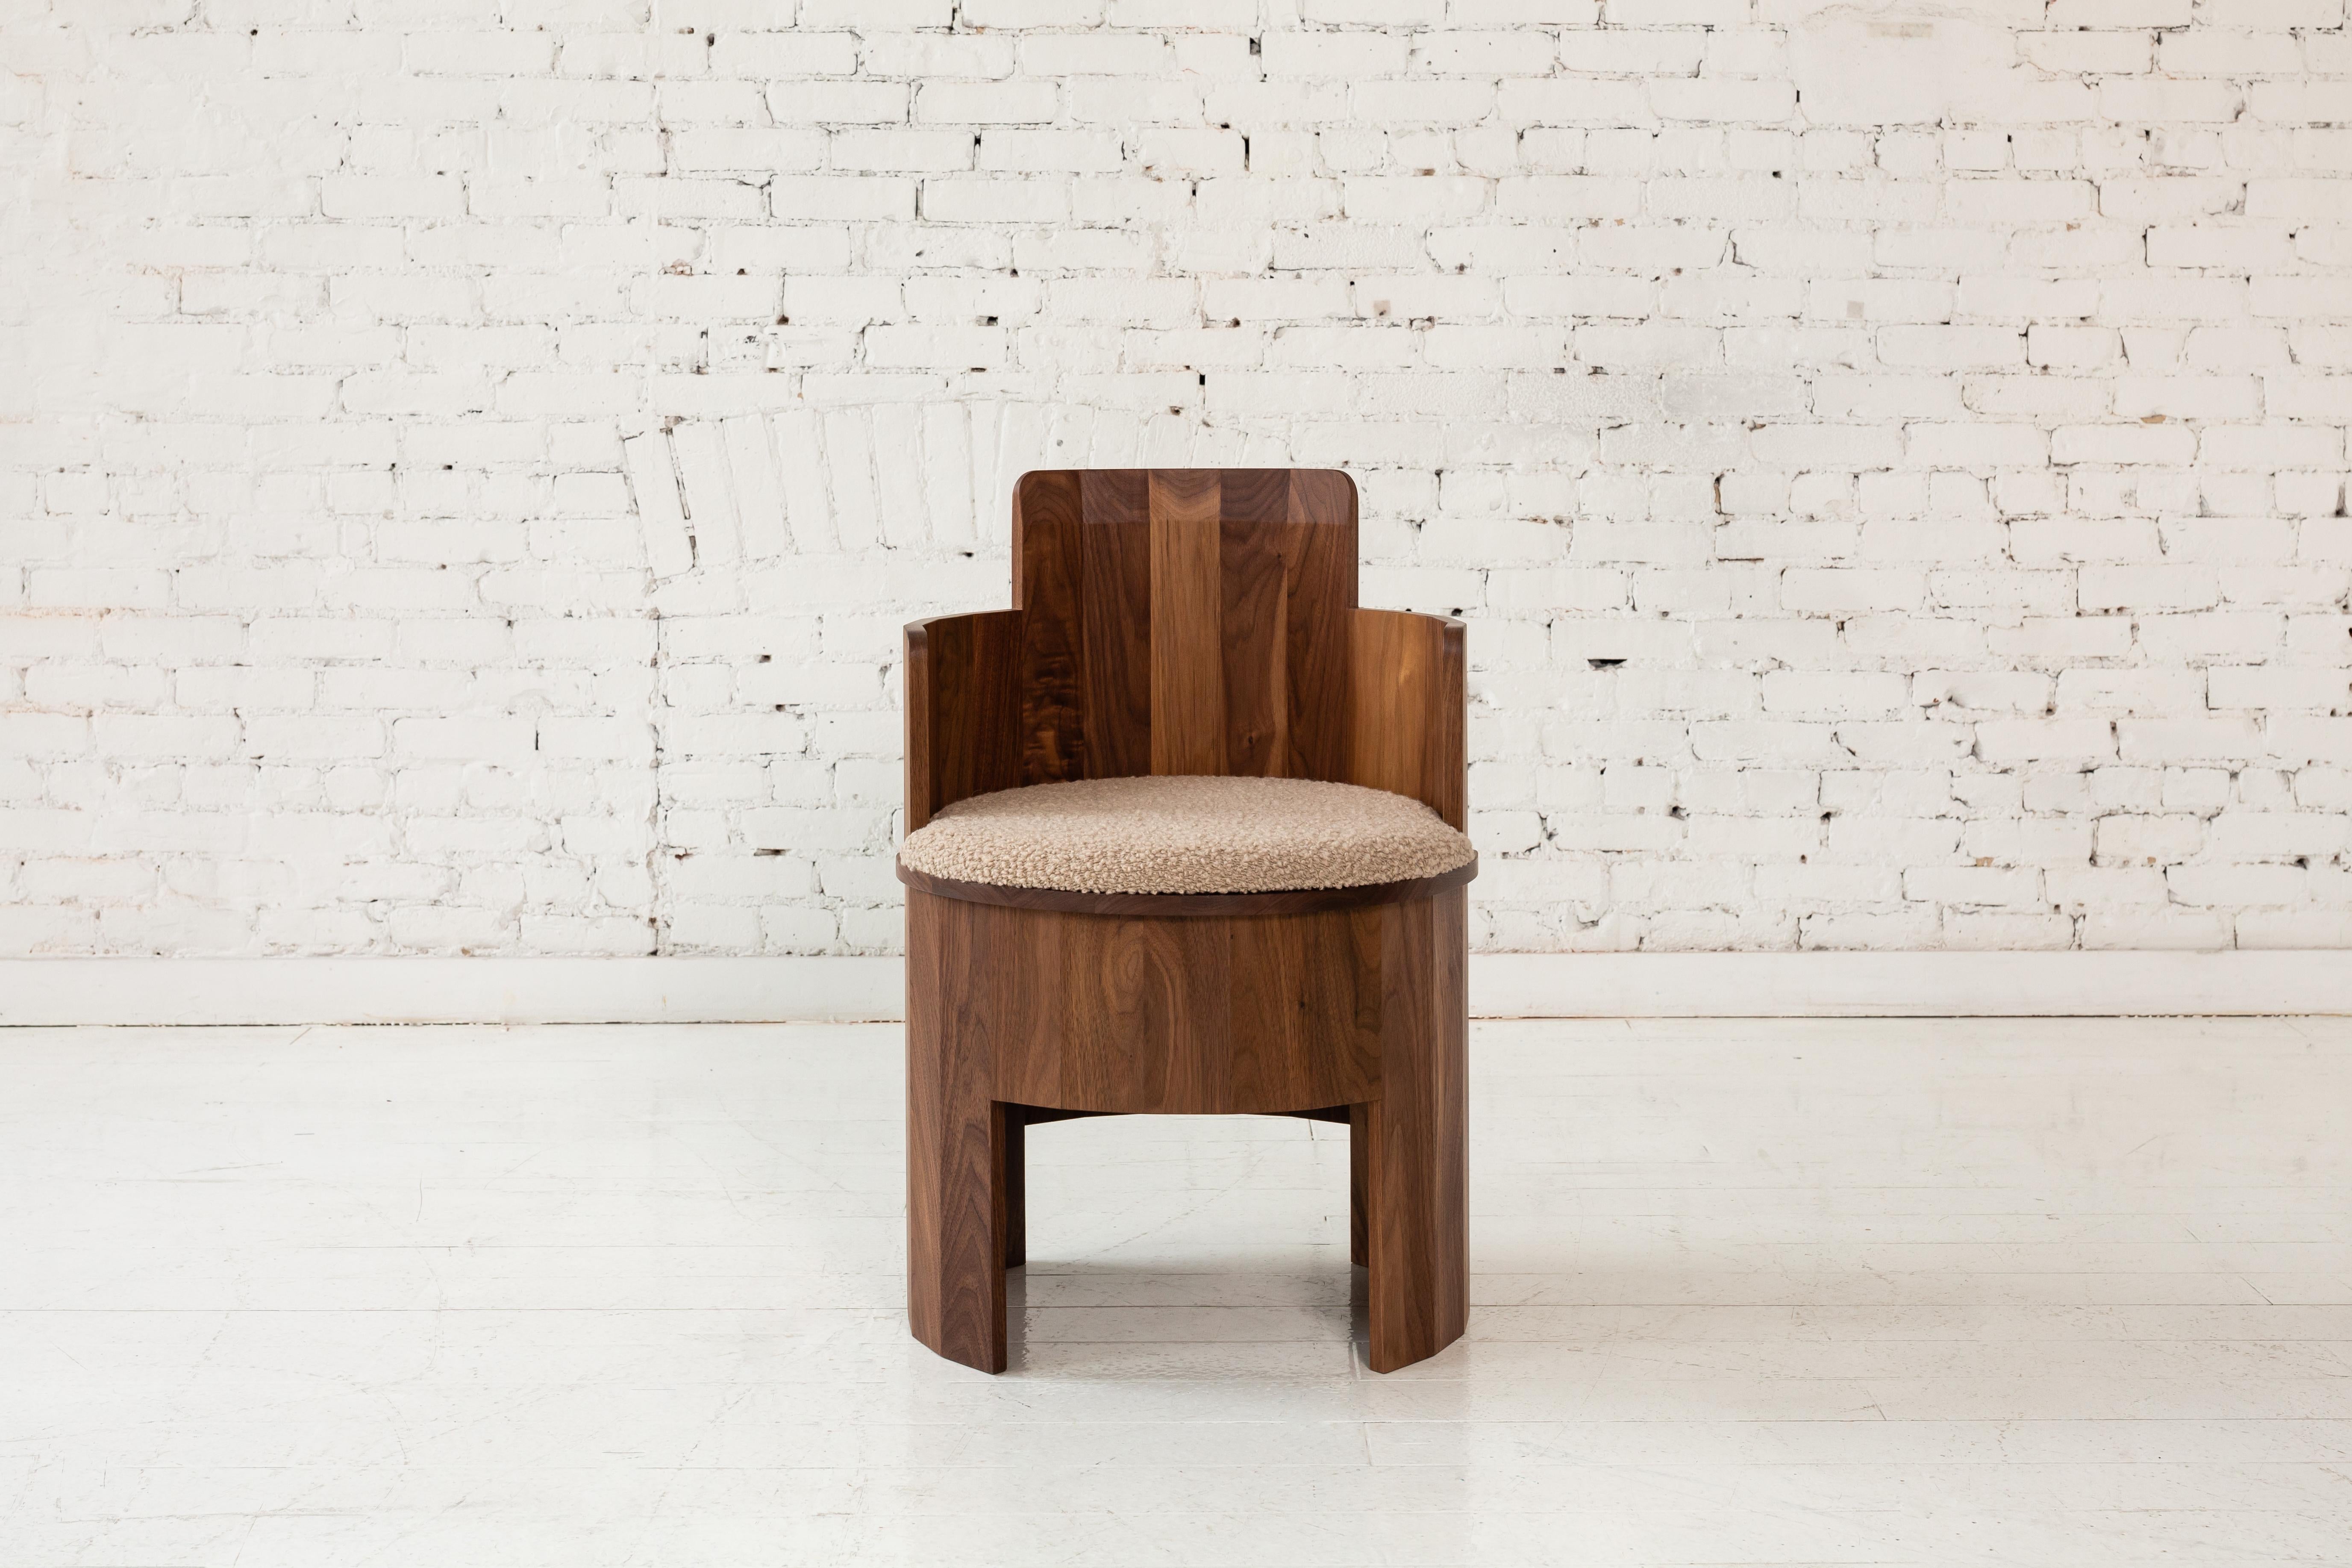 This wood side chair is a part of the new Cooperage dining collection. Each piece features large faceted round elements that with its namesake reference the traditional cooper's trade of making barrels.

The occasional chair table is shown in